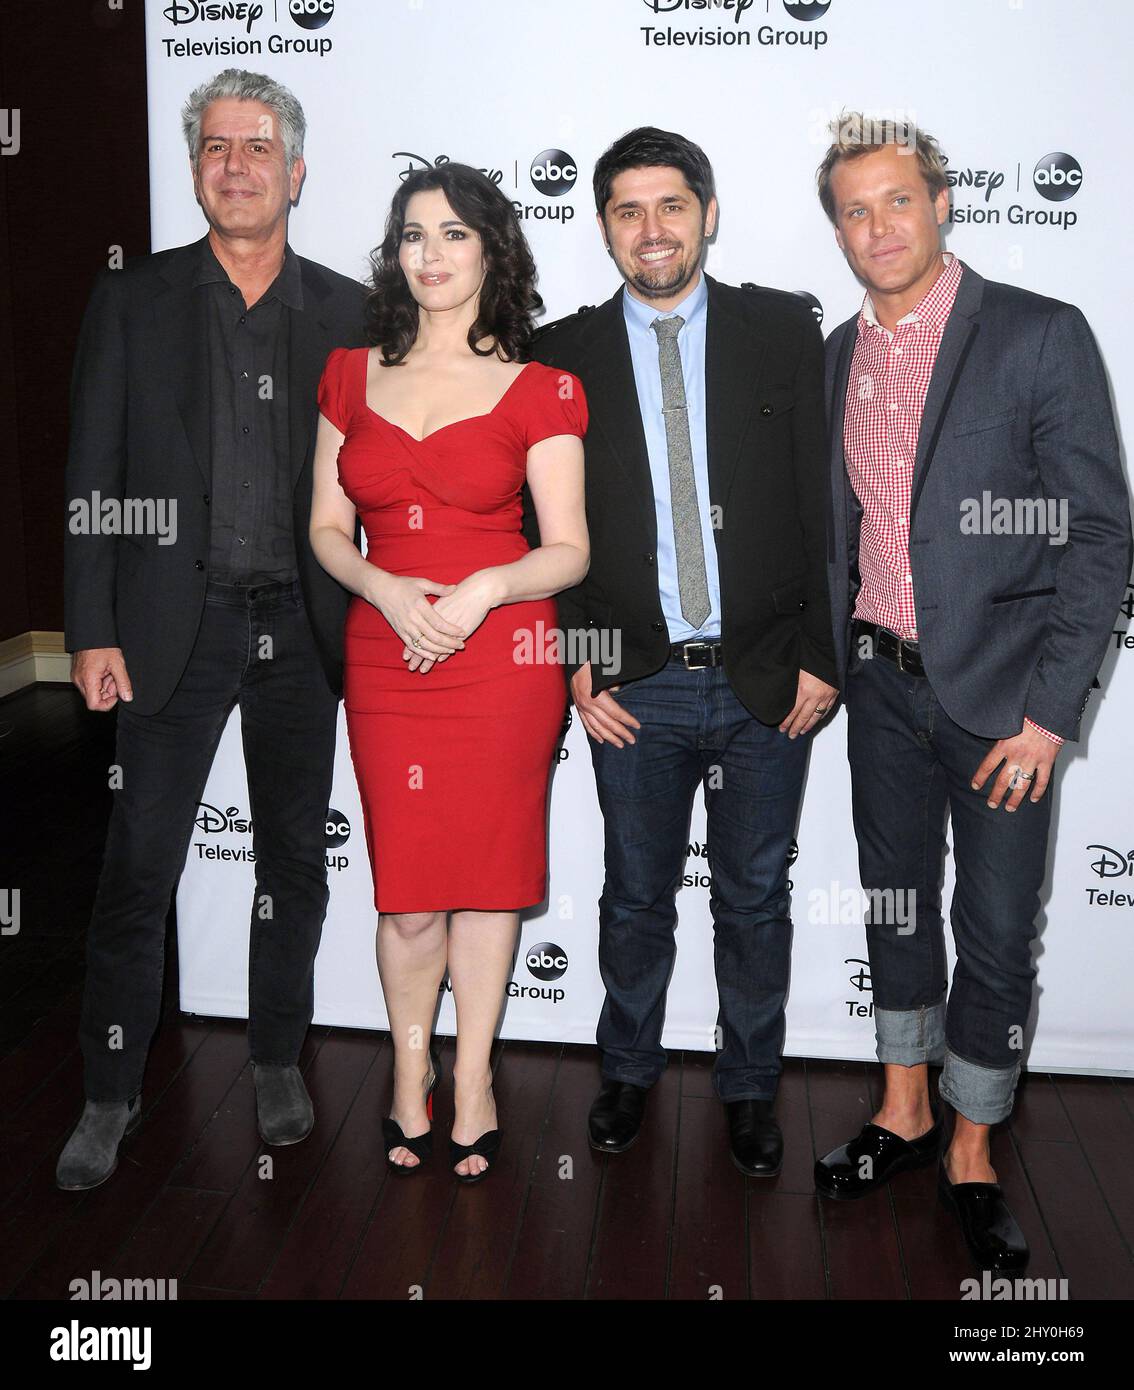 Anthony Bourdain, Nigella Lawson, Ludo Lefebvre and Brian Malarkey attending the Disney ABC Television Group - 2013 TCA Winter Press Tour held at the Langham Huntington Hotel in Los Angeles, USA. Stock Photo